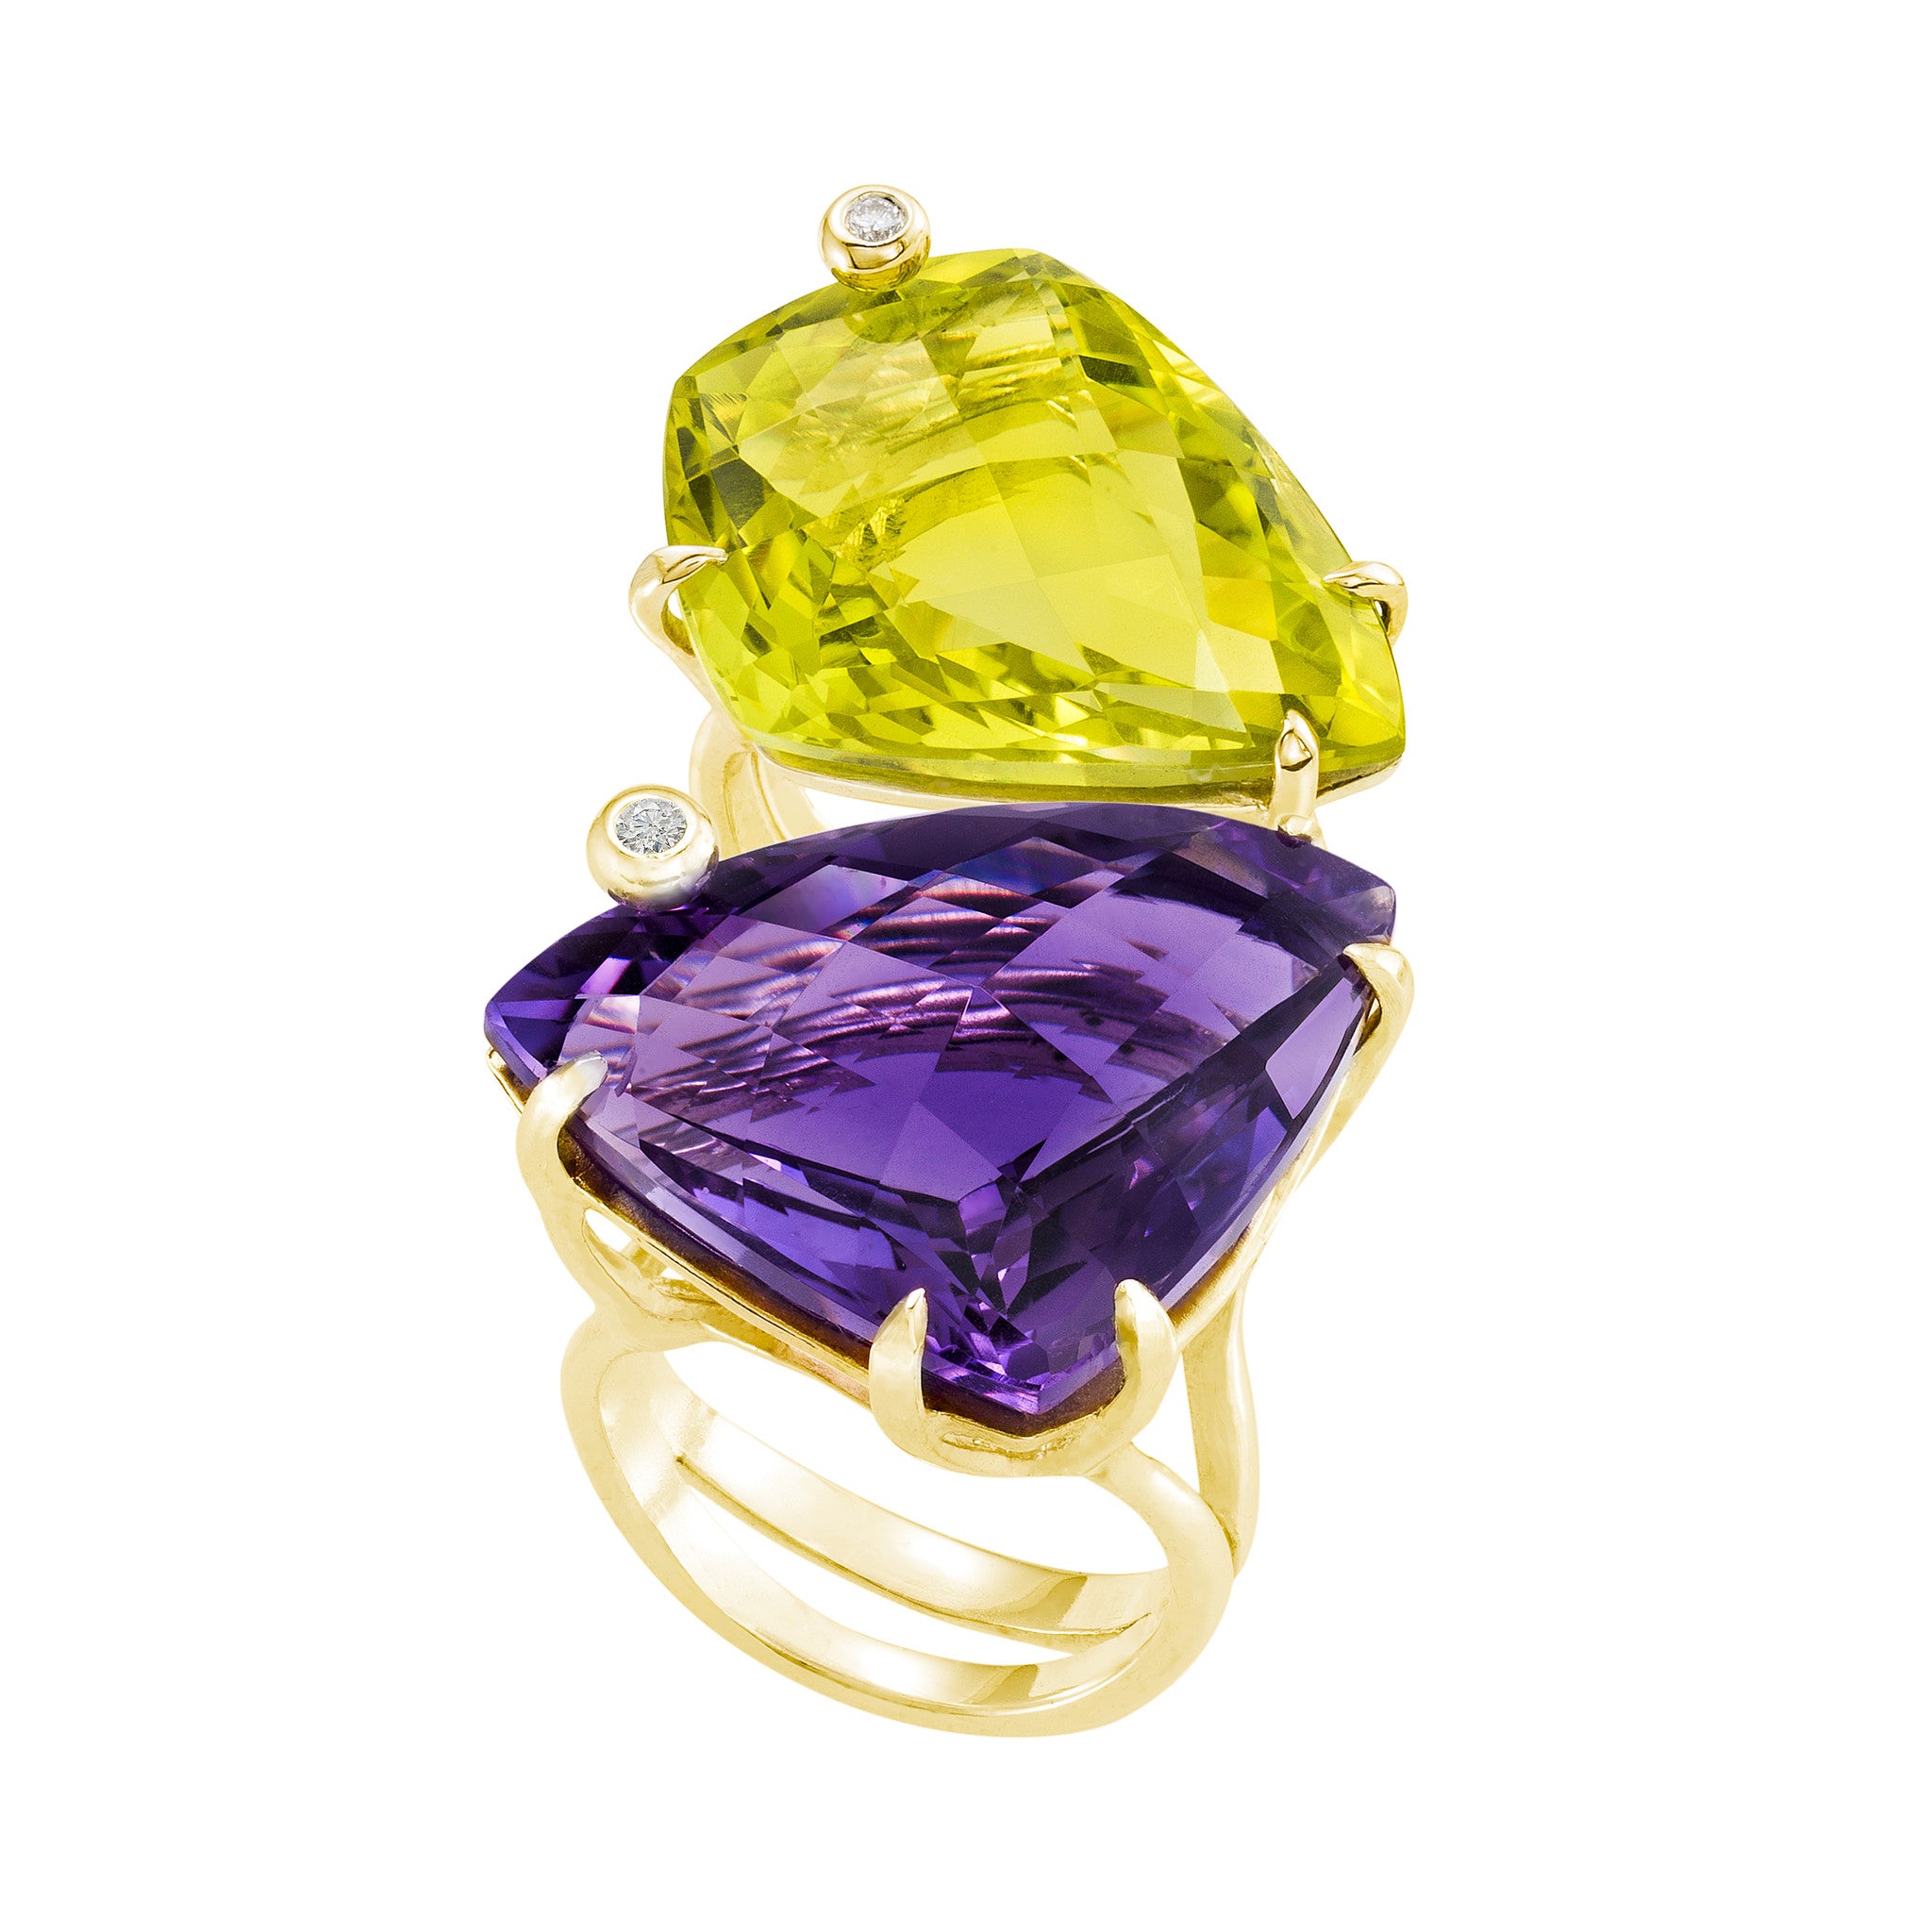 Gold Triangle Cocktail Ring: Amethyst